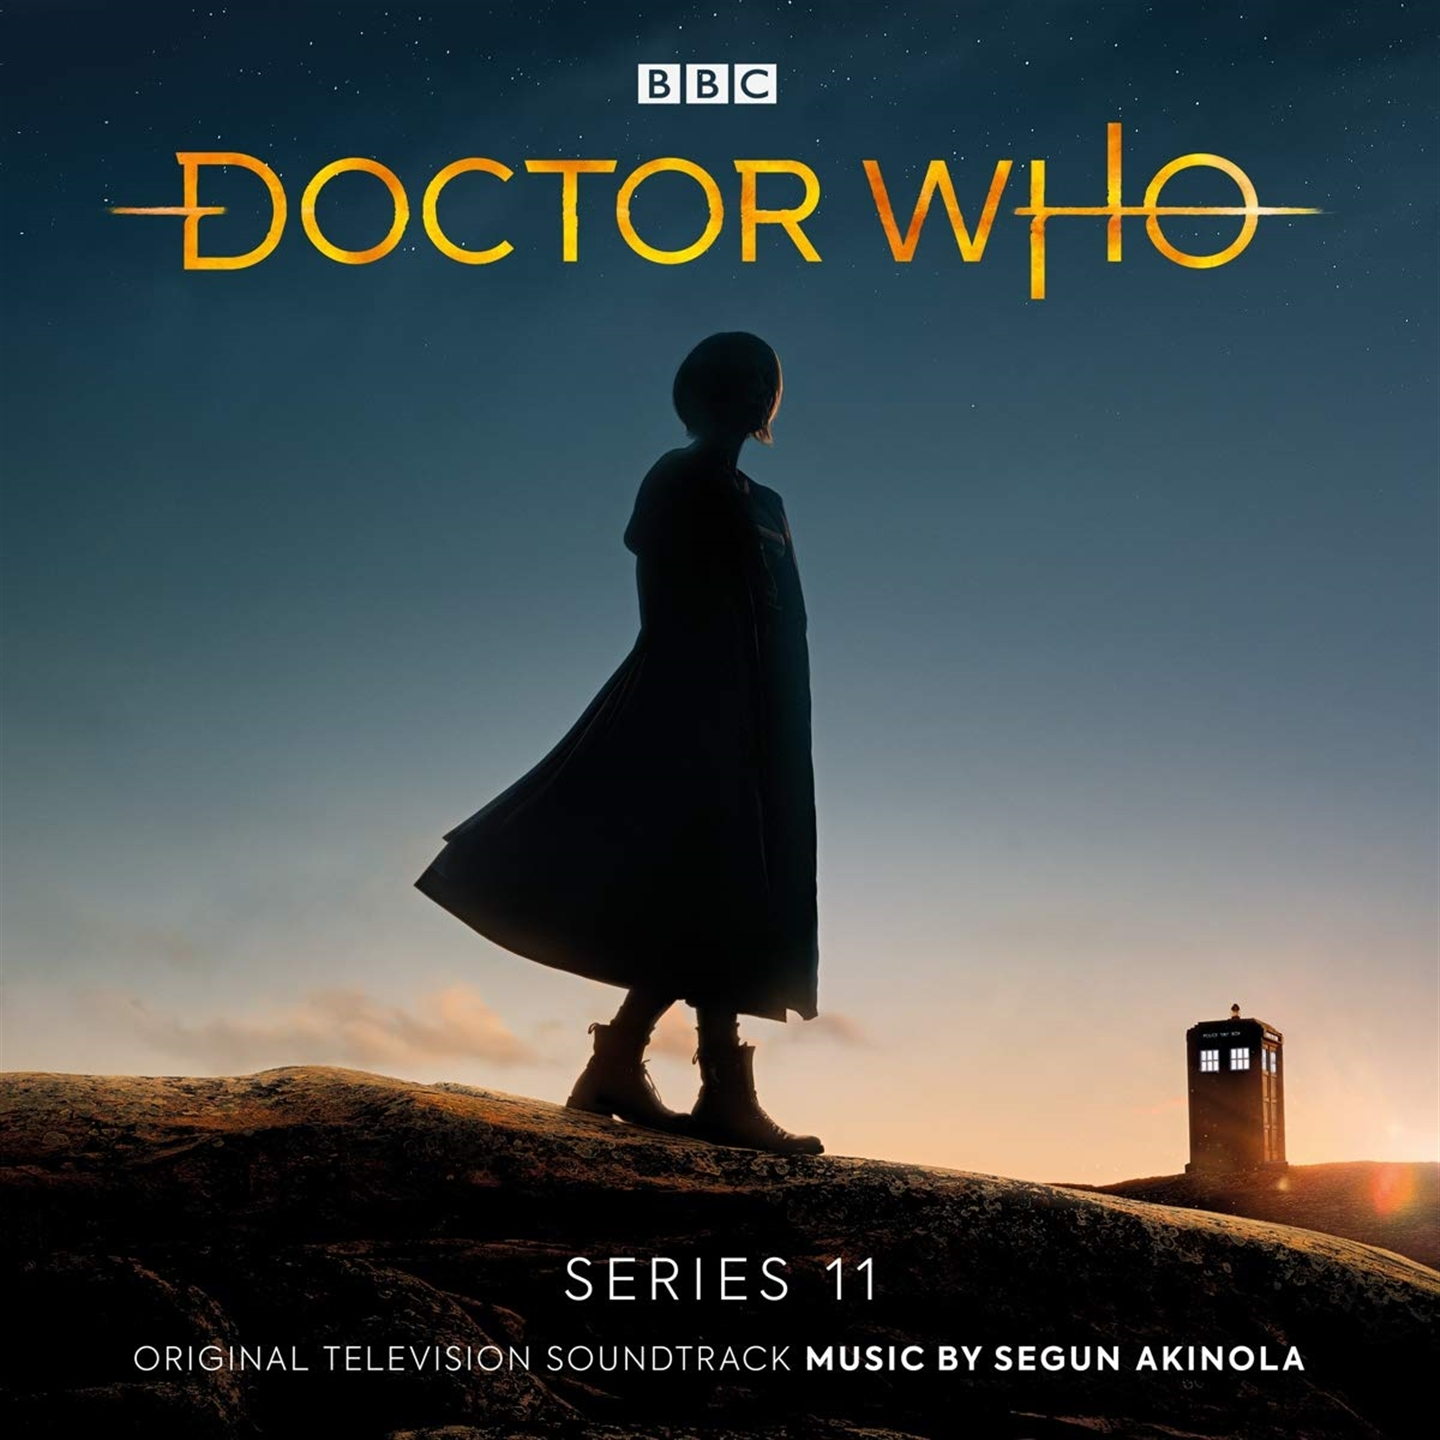 DOCTOR WHO - SERIES 11